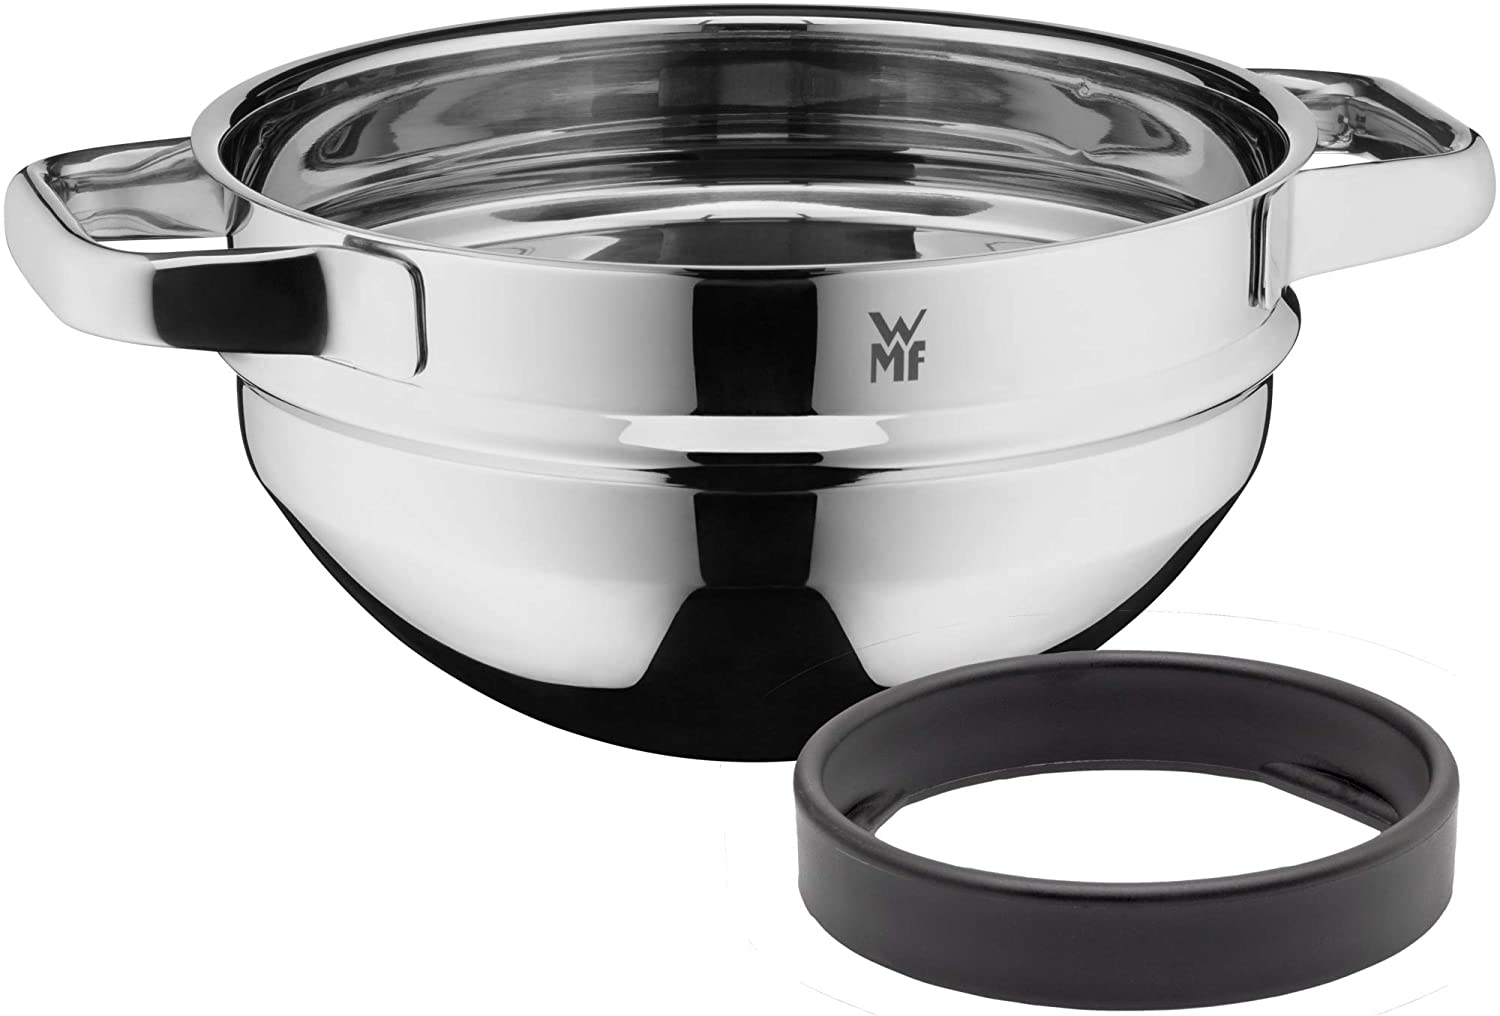 WMF Compact Cuisine Water Bath Bowl 20 cm Stackable Mixing Bowl for Water Bath, Cromargan Polished Stainless Steel, Dishwasher Safe